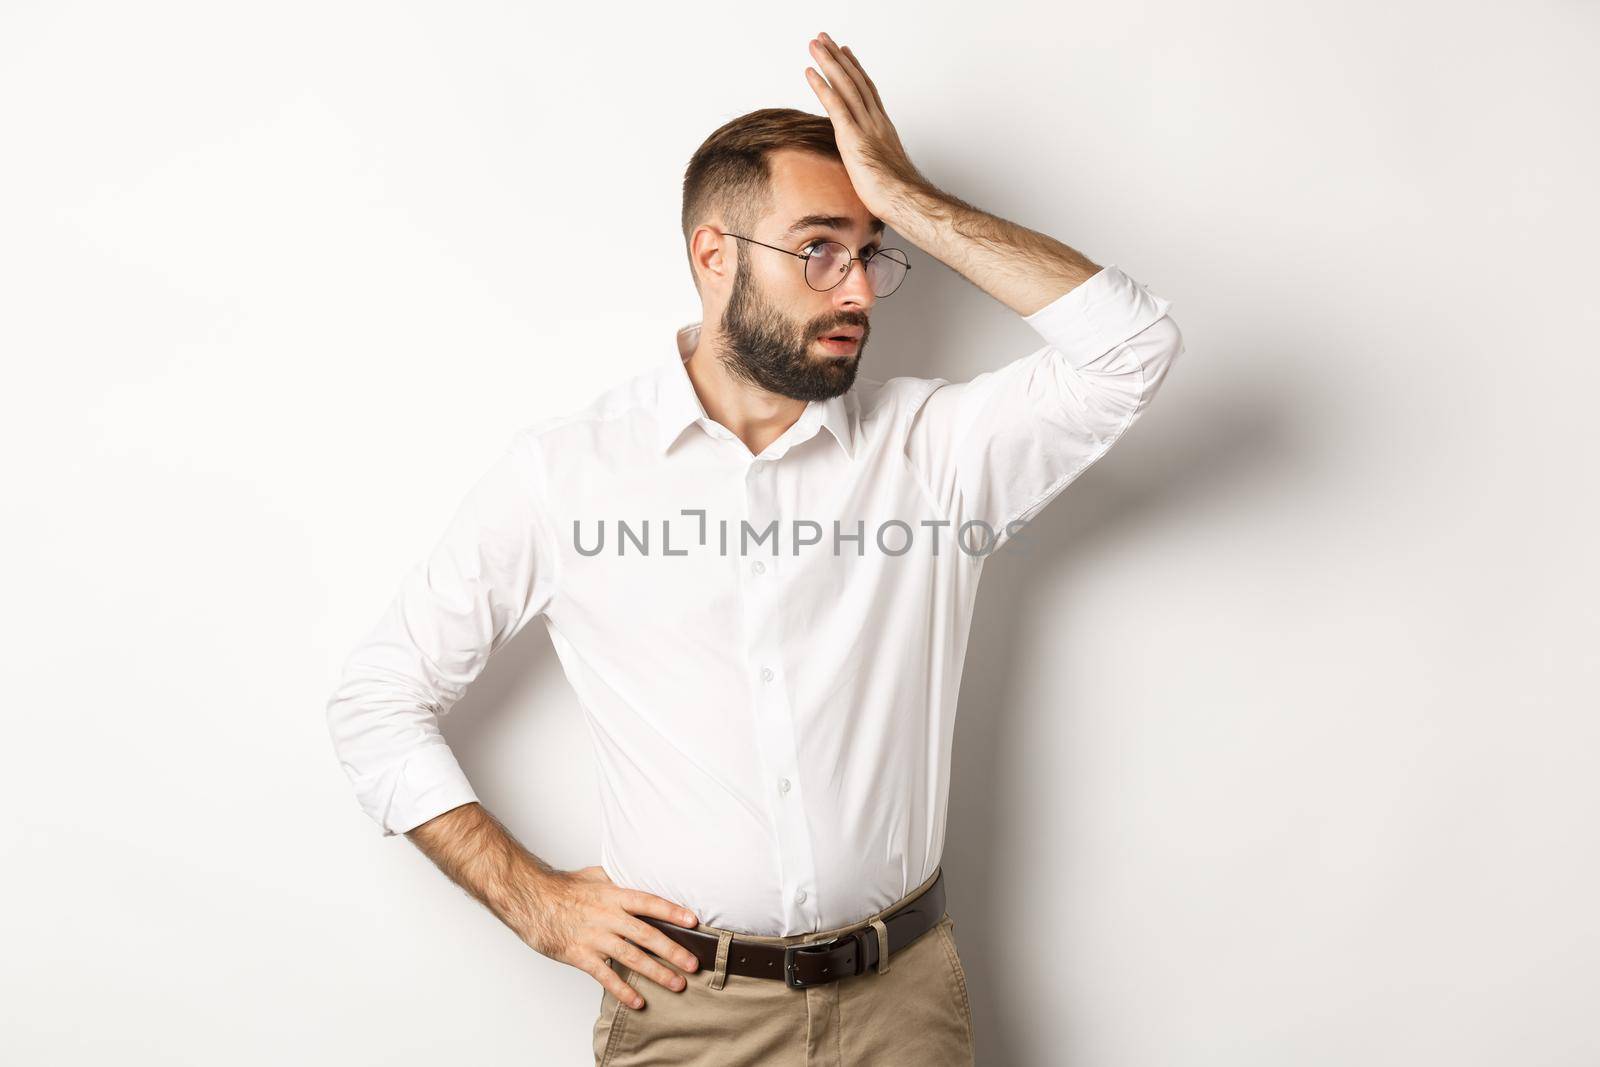 Annoyed man manager roll his eyes and slap forehead, facepalm from something tiresome, standing over white background.